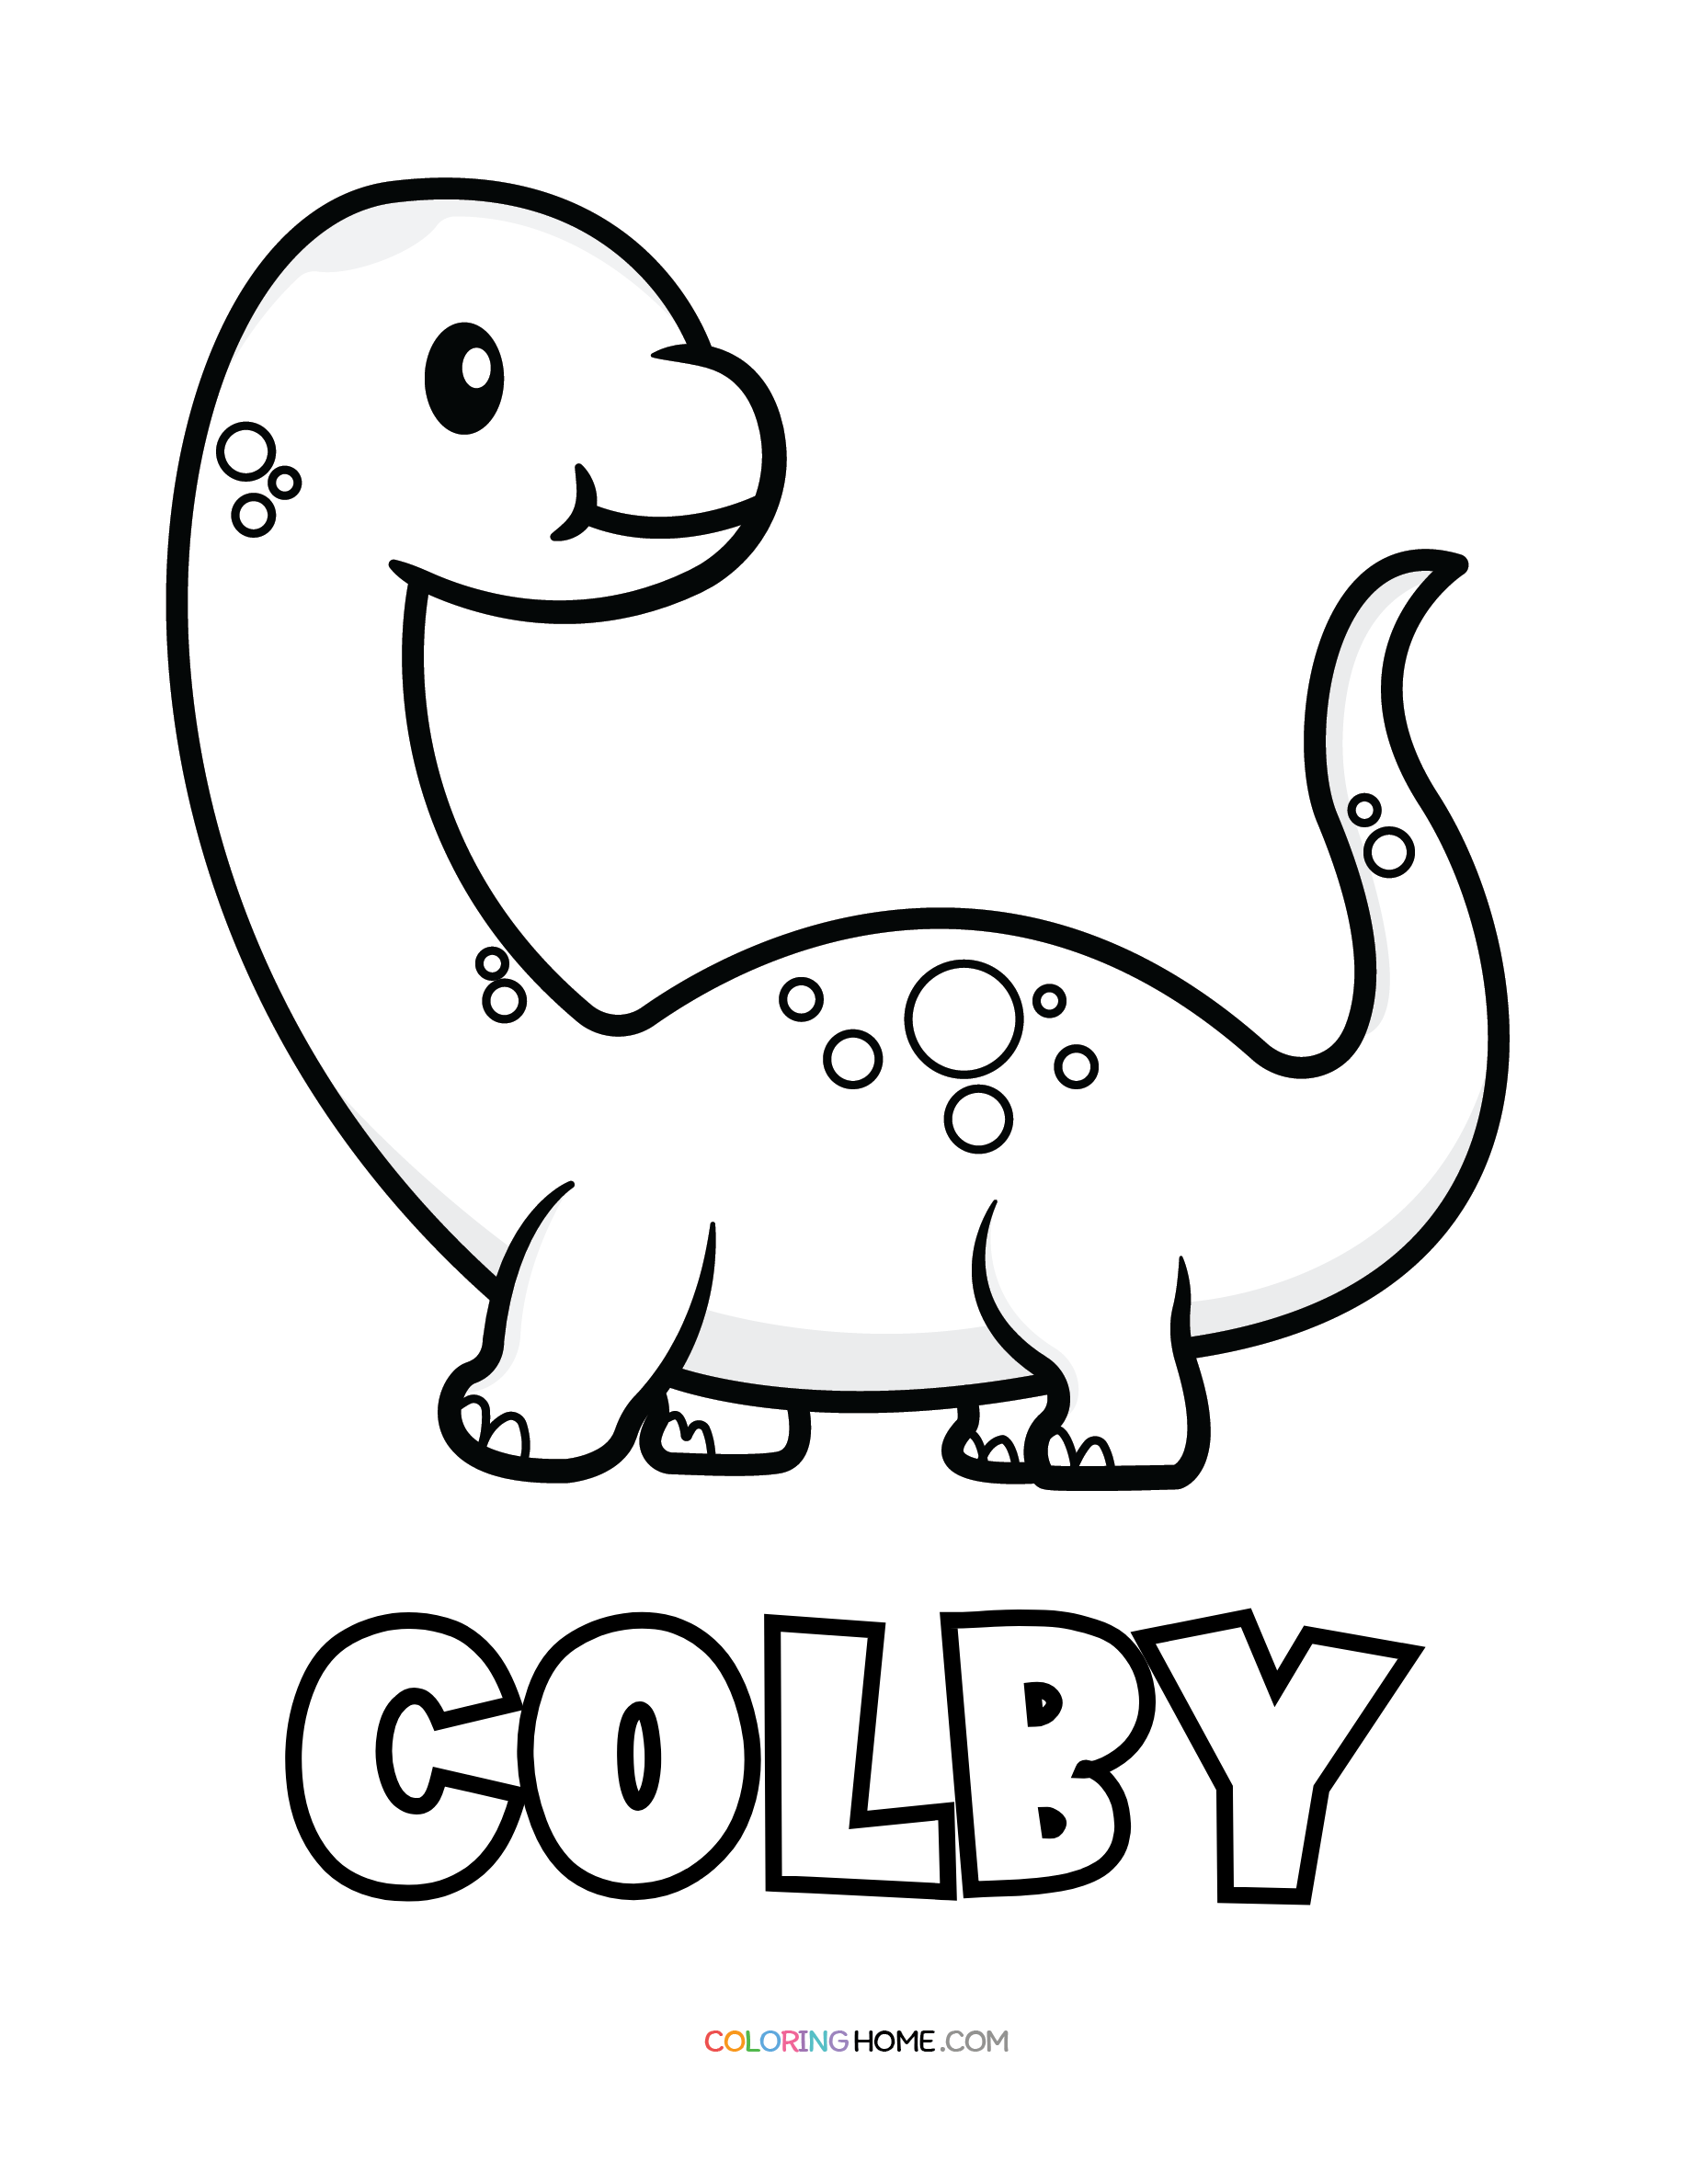 Colby dinosaur coloring page